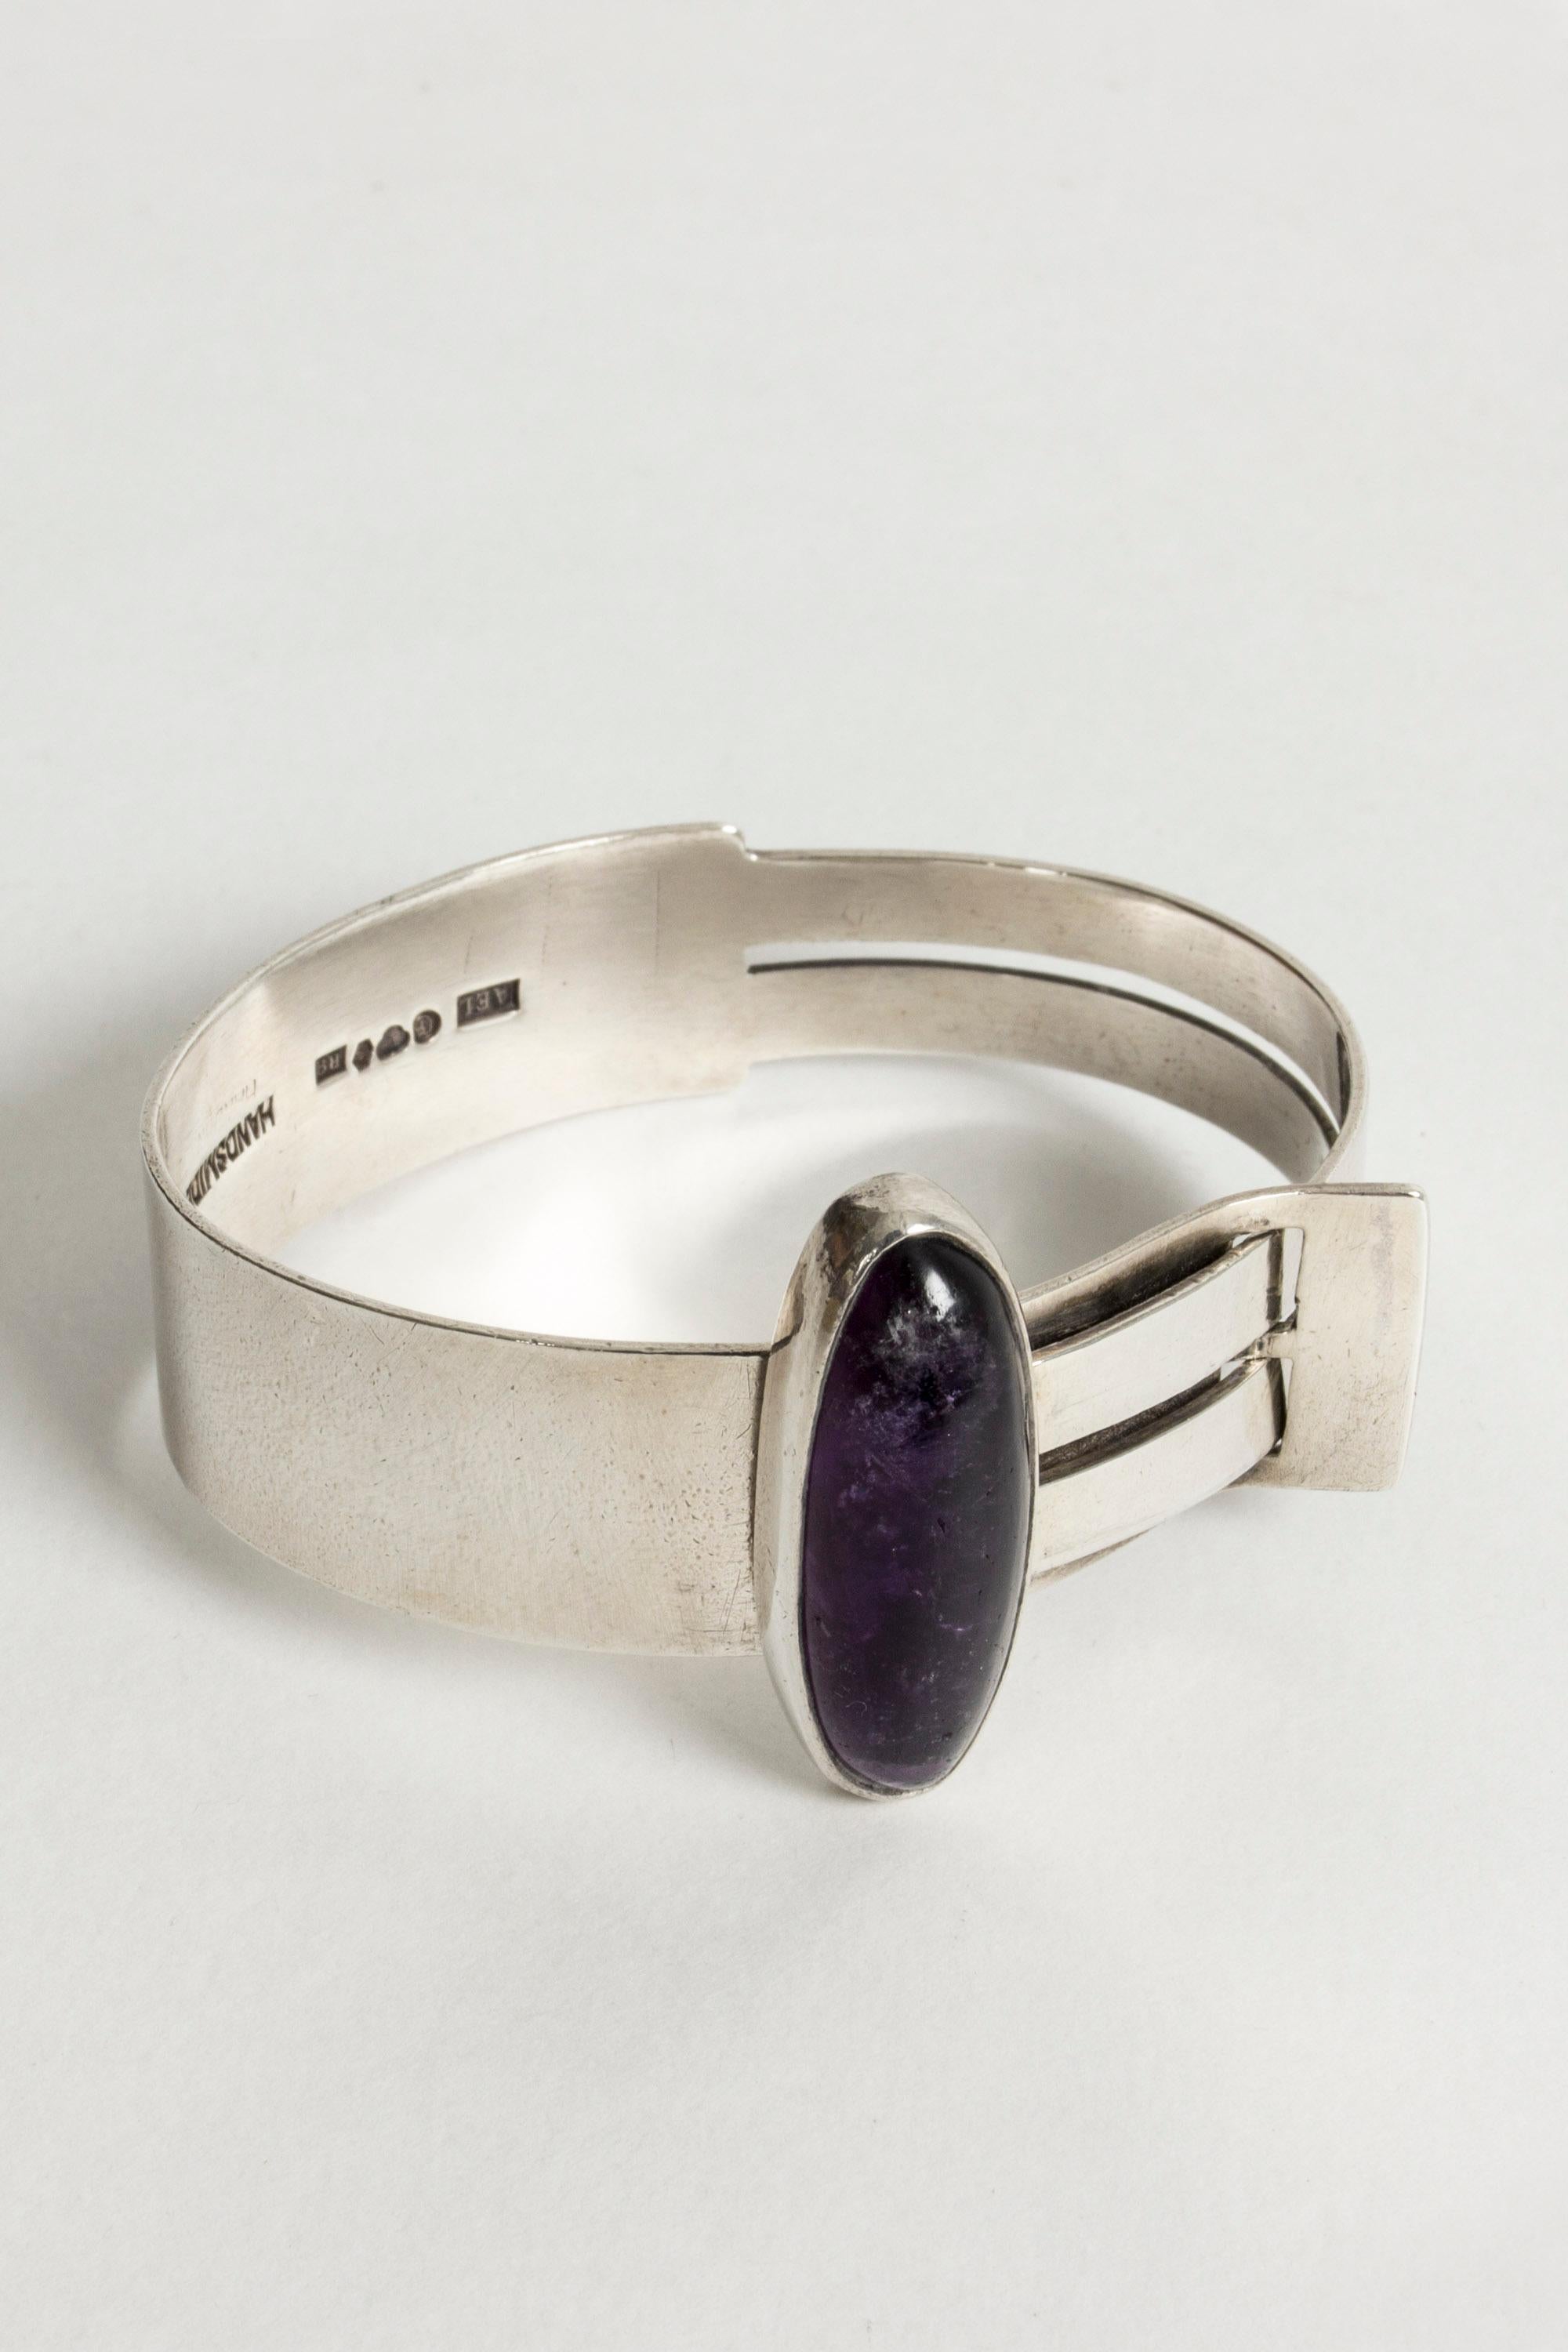 Silver bracelet with a large oval amethyst and an interlocking design by Harry Lagerström. Beautiful deep purple color of the amethyst. Small size, fits a very slender wrist.